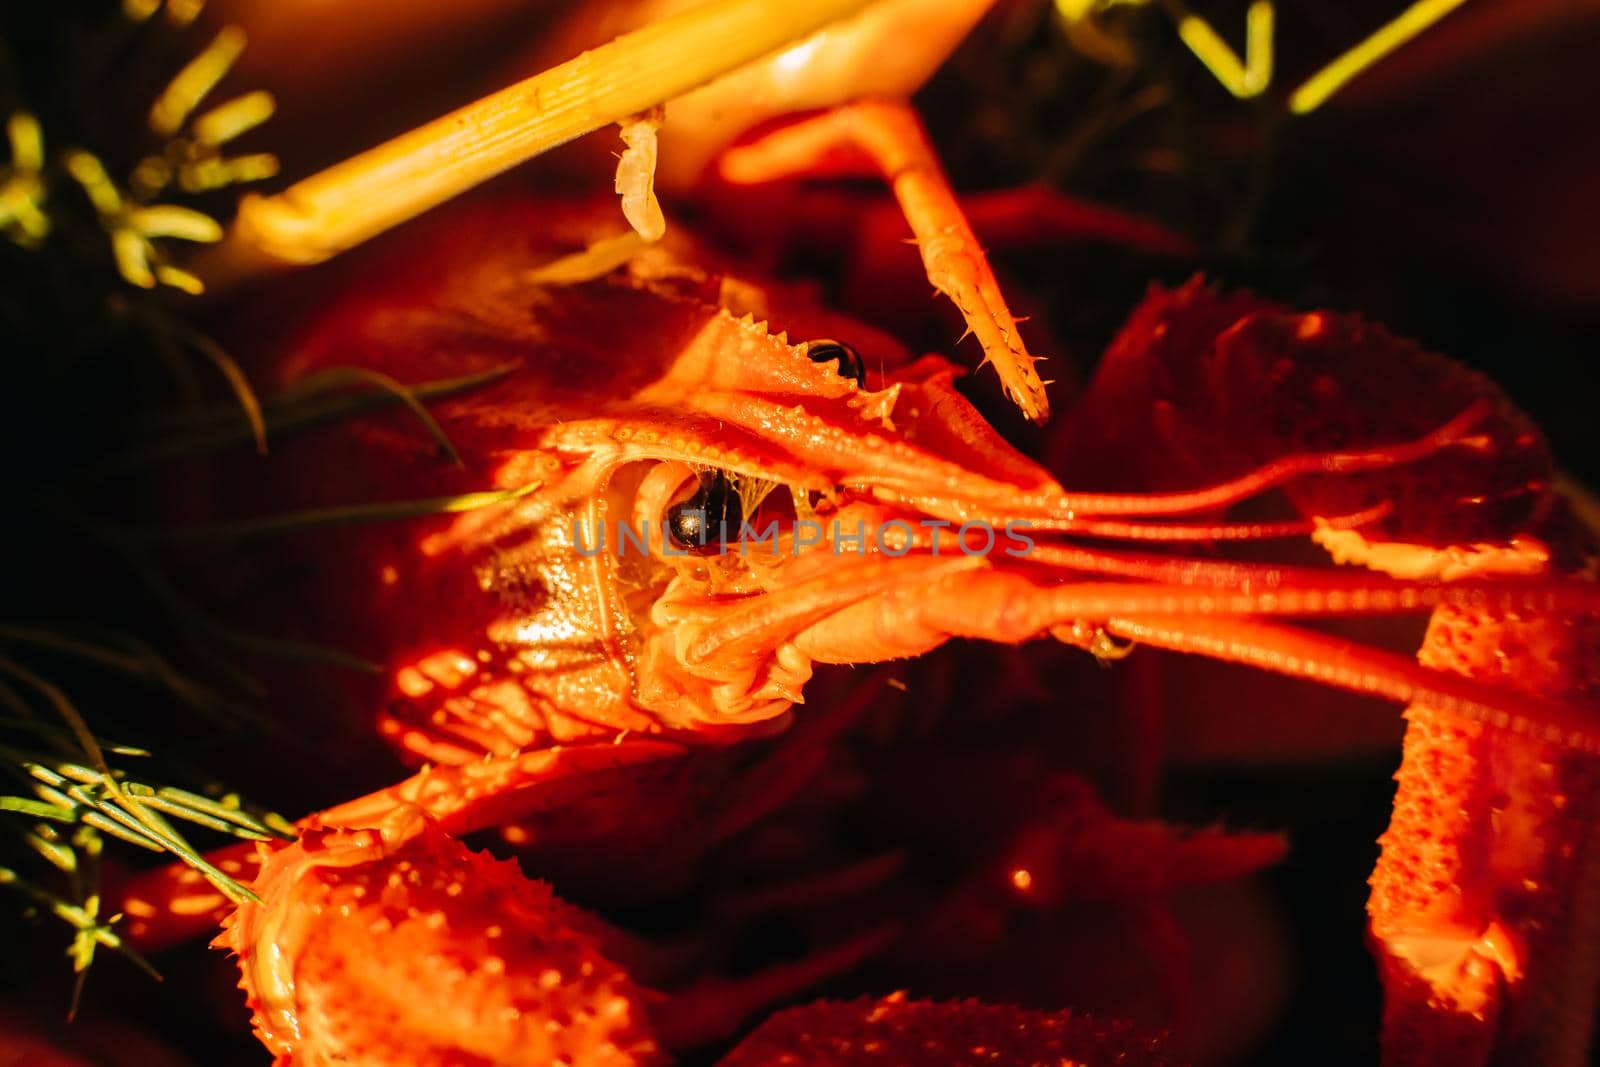 Macro stock photo of a boiled crayfish or clawfish in artificial light. Prepared lobster in close-up.